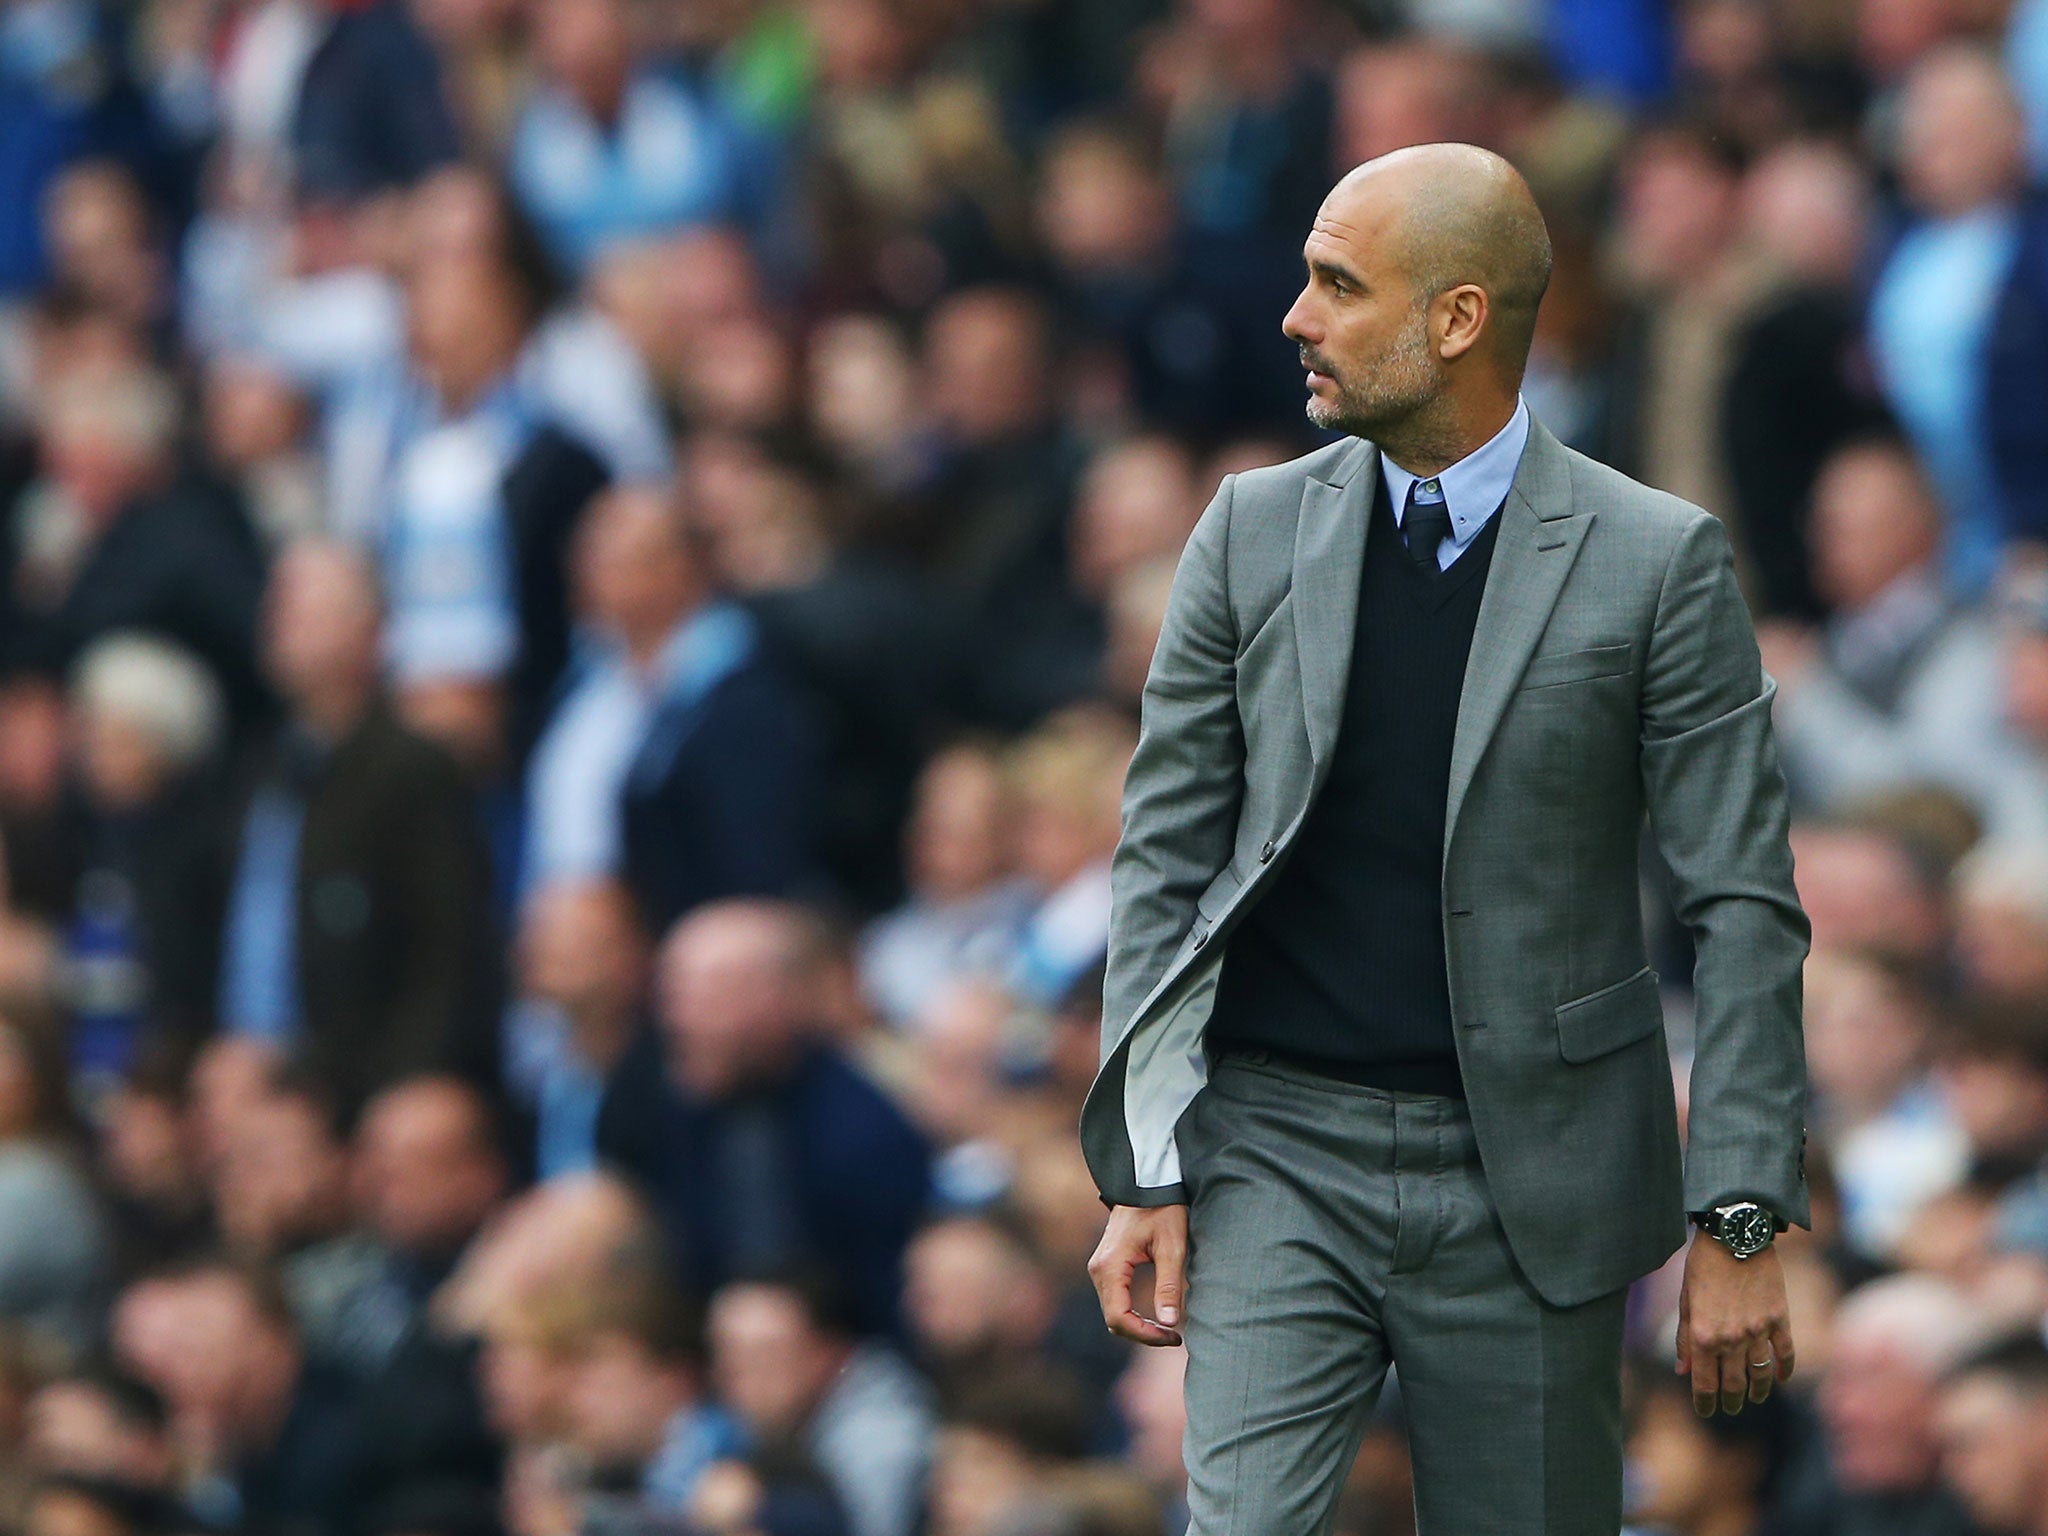 Pep Guardiola has not lived up to the hype with City this season